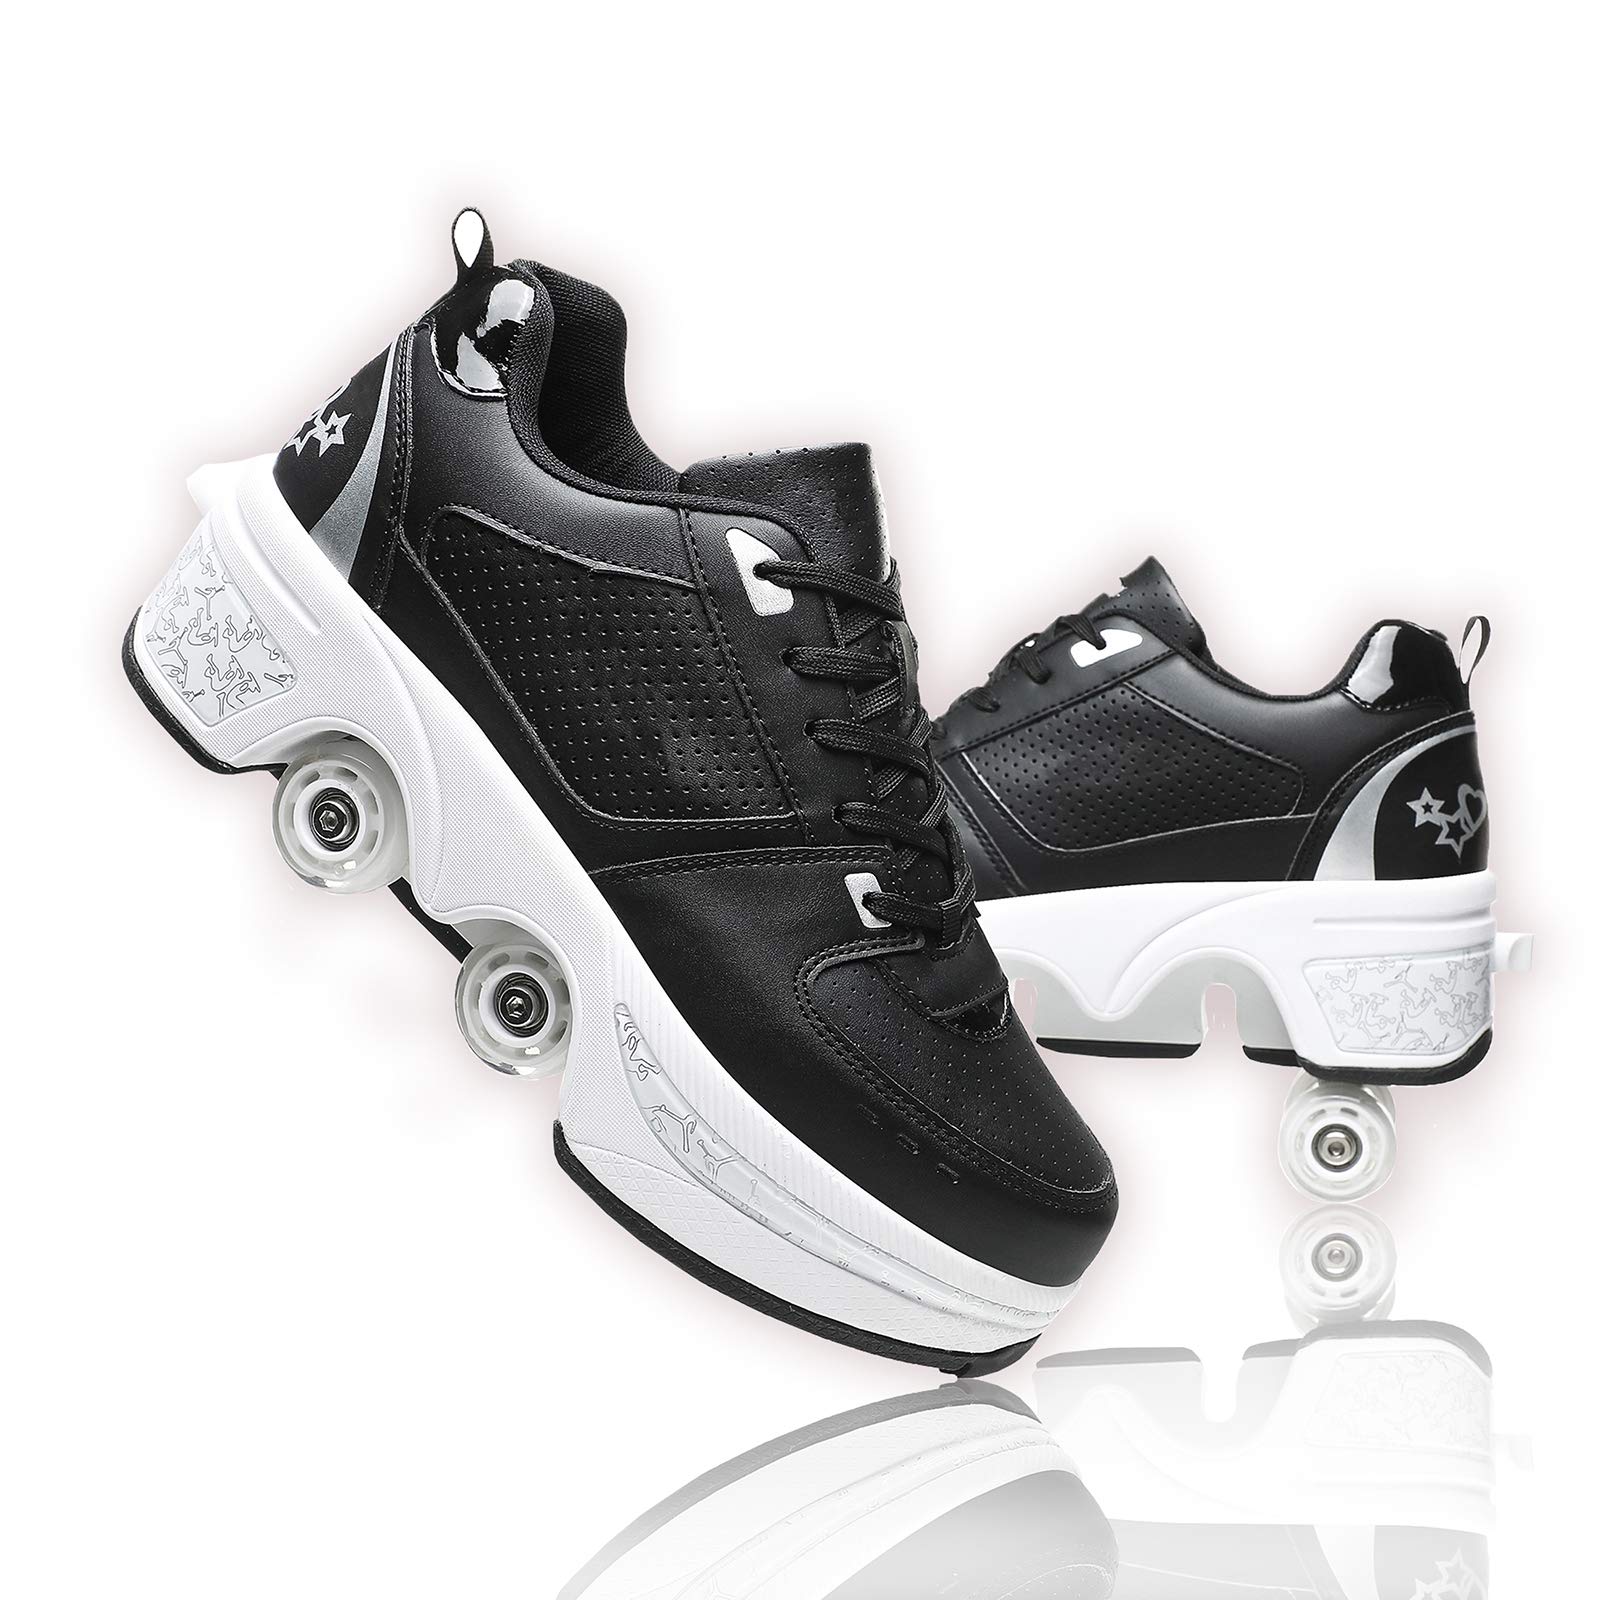 wedsf Double-Row Deform Wheel Automatic Walking Shoes Invisible Deformation Roller Skate 2 in 1 Removable Pulley Skates Skating Parkou